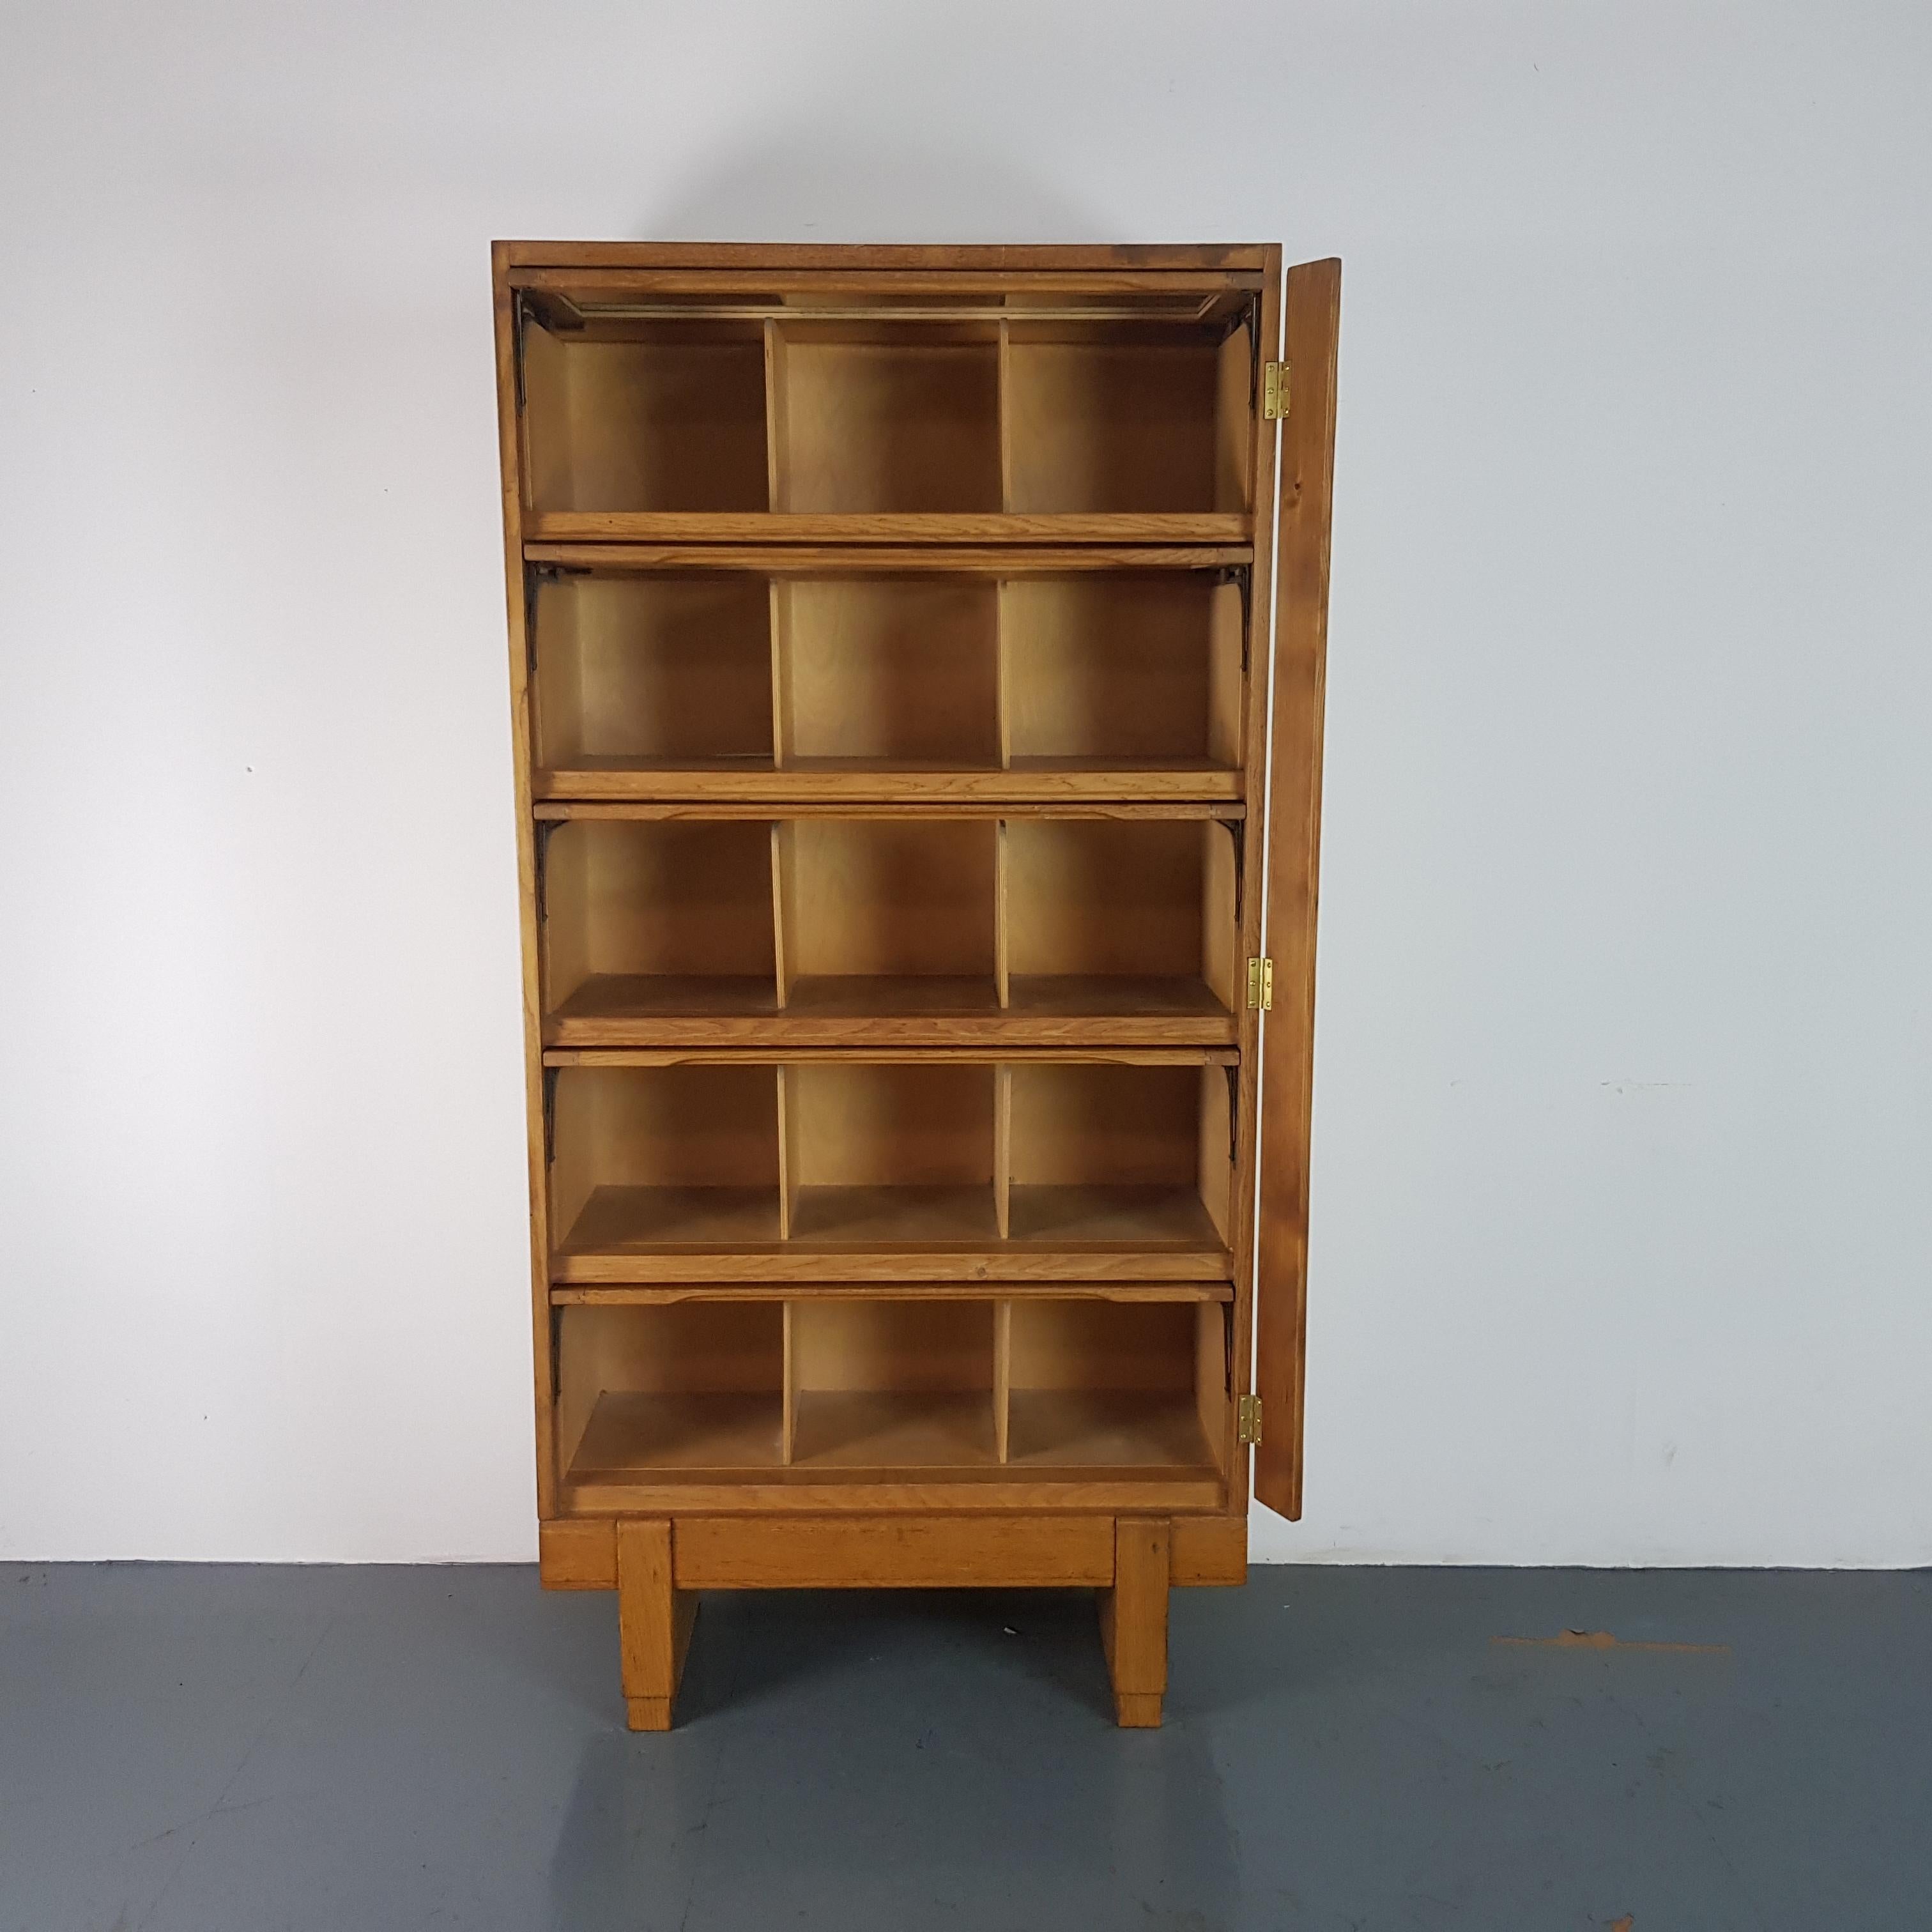 Wonderful vintage bookcase designed and made in the UK by Staverton (Dartington, South Devon). In the middle of the last century, Staverton manufactured furniture ranges for the Crown Suppliers and this developed into contracts for Crown Court